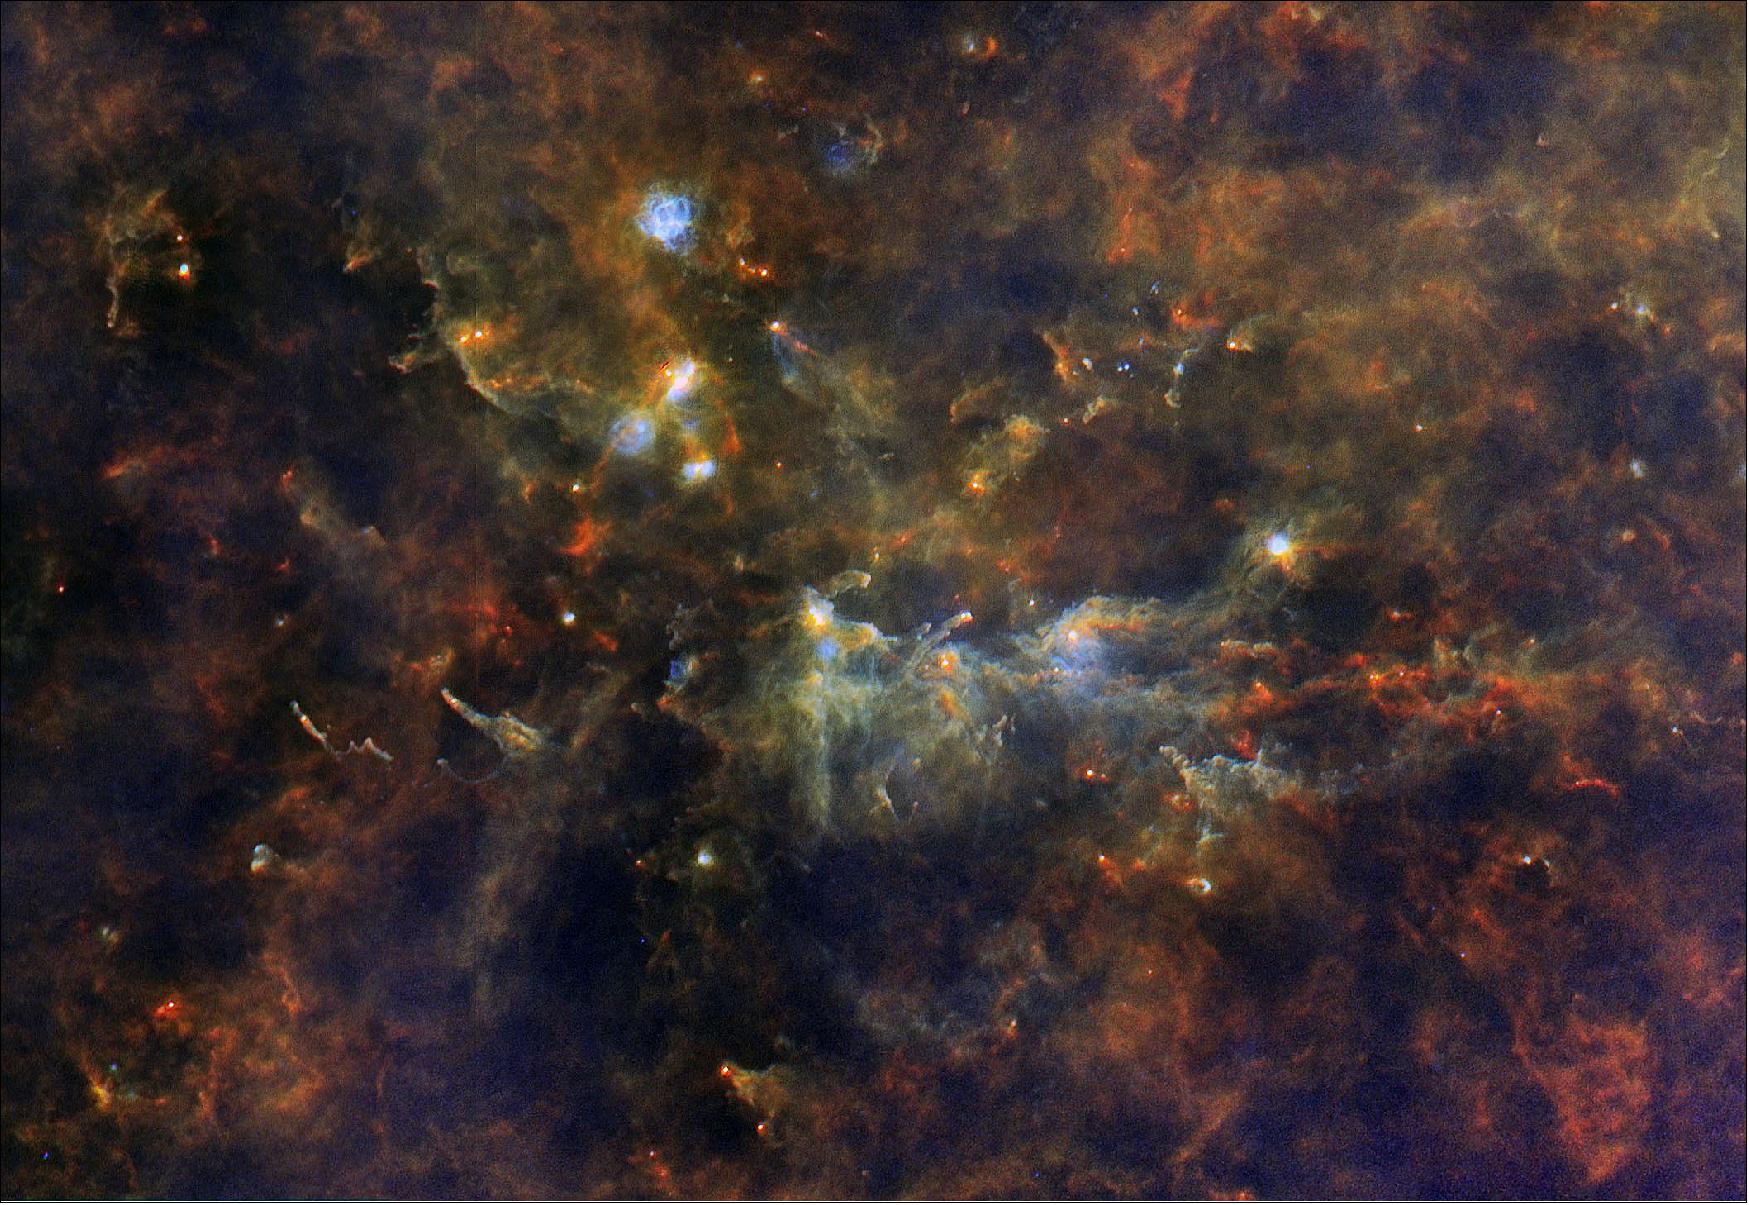 Figure 39: The image was obtained as part of Herschel’s Hi-GAL key-project. This used the infrared space observatory’s instruments to image the entire galactic plane in five different infrared wavelengths. These wavelengths reveal cold material, most of it between -220ºC and -260ºC. None of it can be seen at ordinary optical wavelengths, but this infrared view shows astronomers a surprising amount of structure in the cloud’s interior. The surprise is that the Hi-GAL survey has revealed a spider’s web of filaments that stretches across the star-forming regions of our Galaxy. Part of this vast network can be seen in this image as a filigree of red and orange threads (image credit: ESA/Herschel/PACS, SPIRE/Hi-GAL Project)